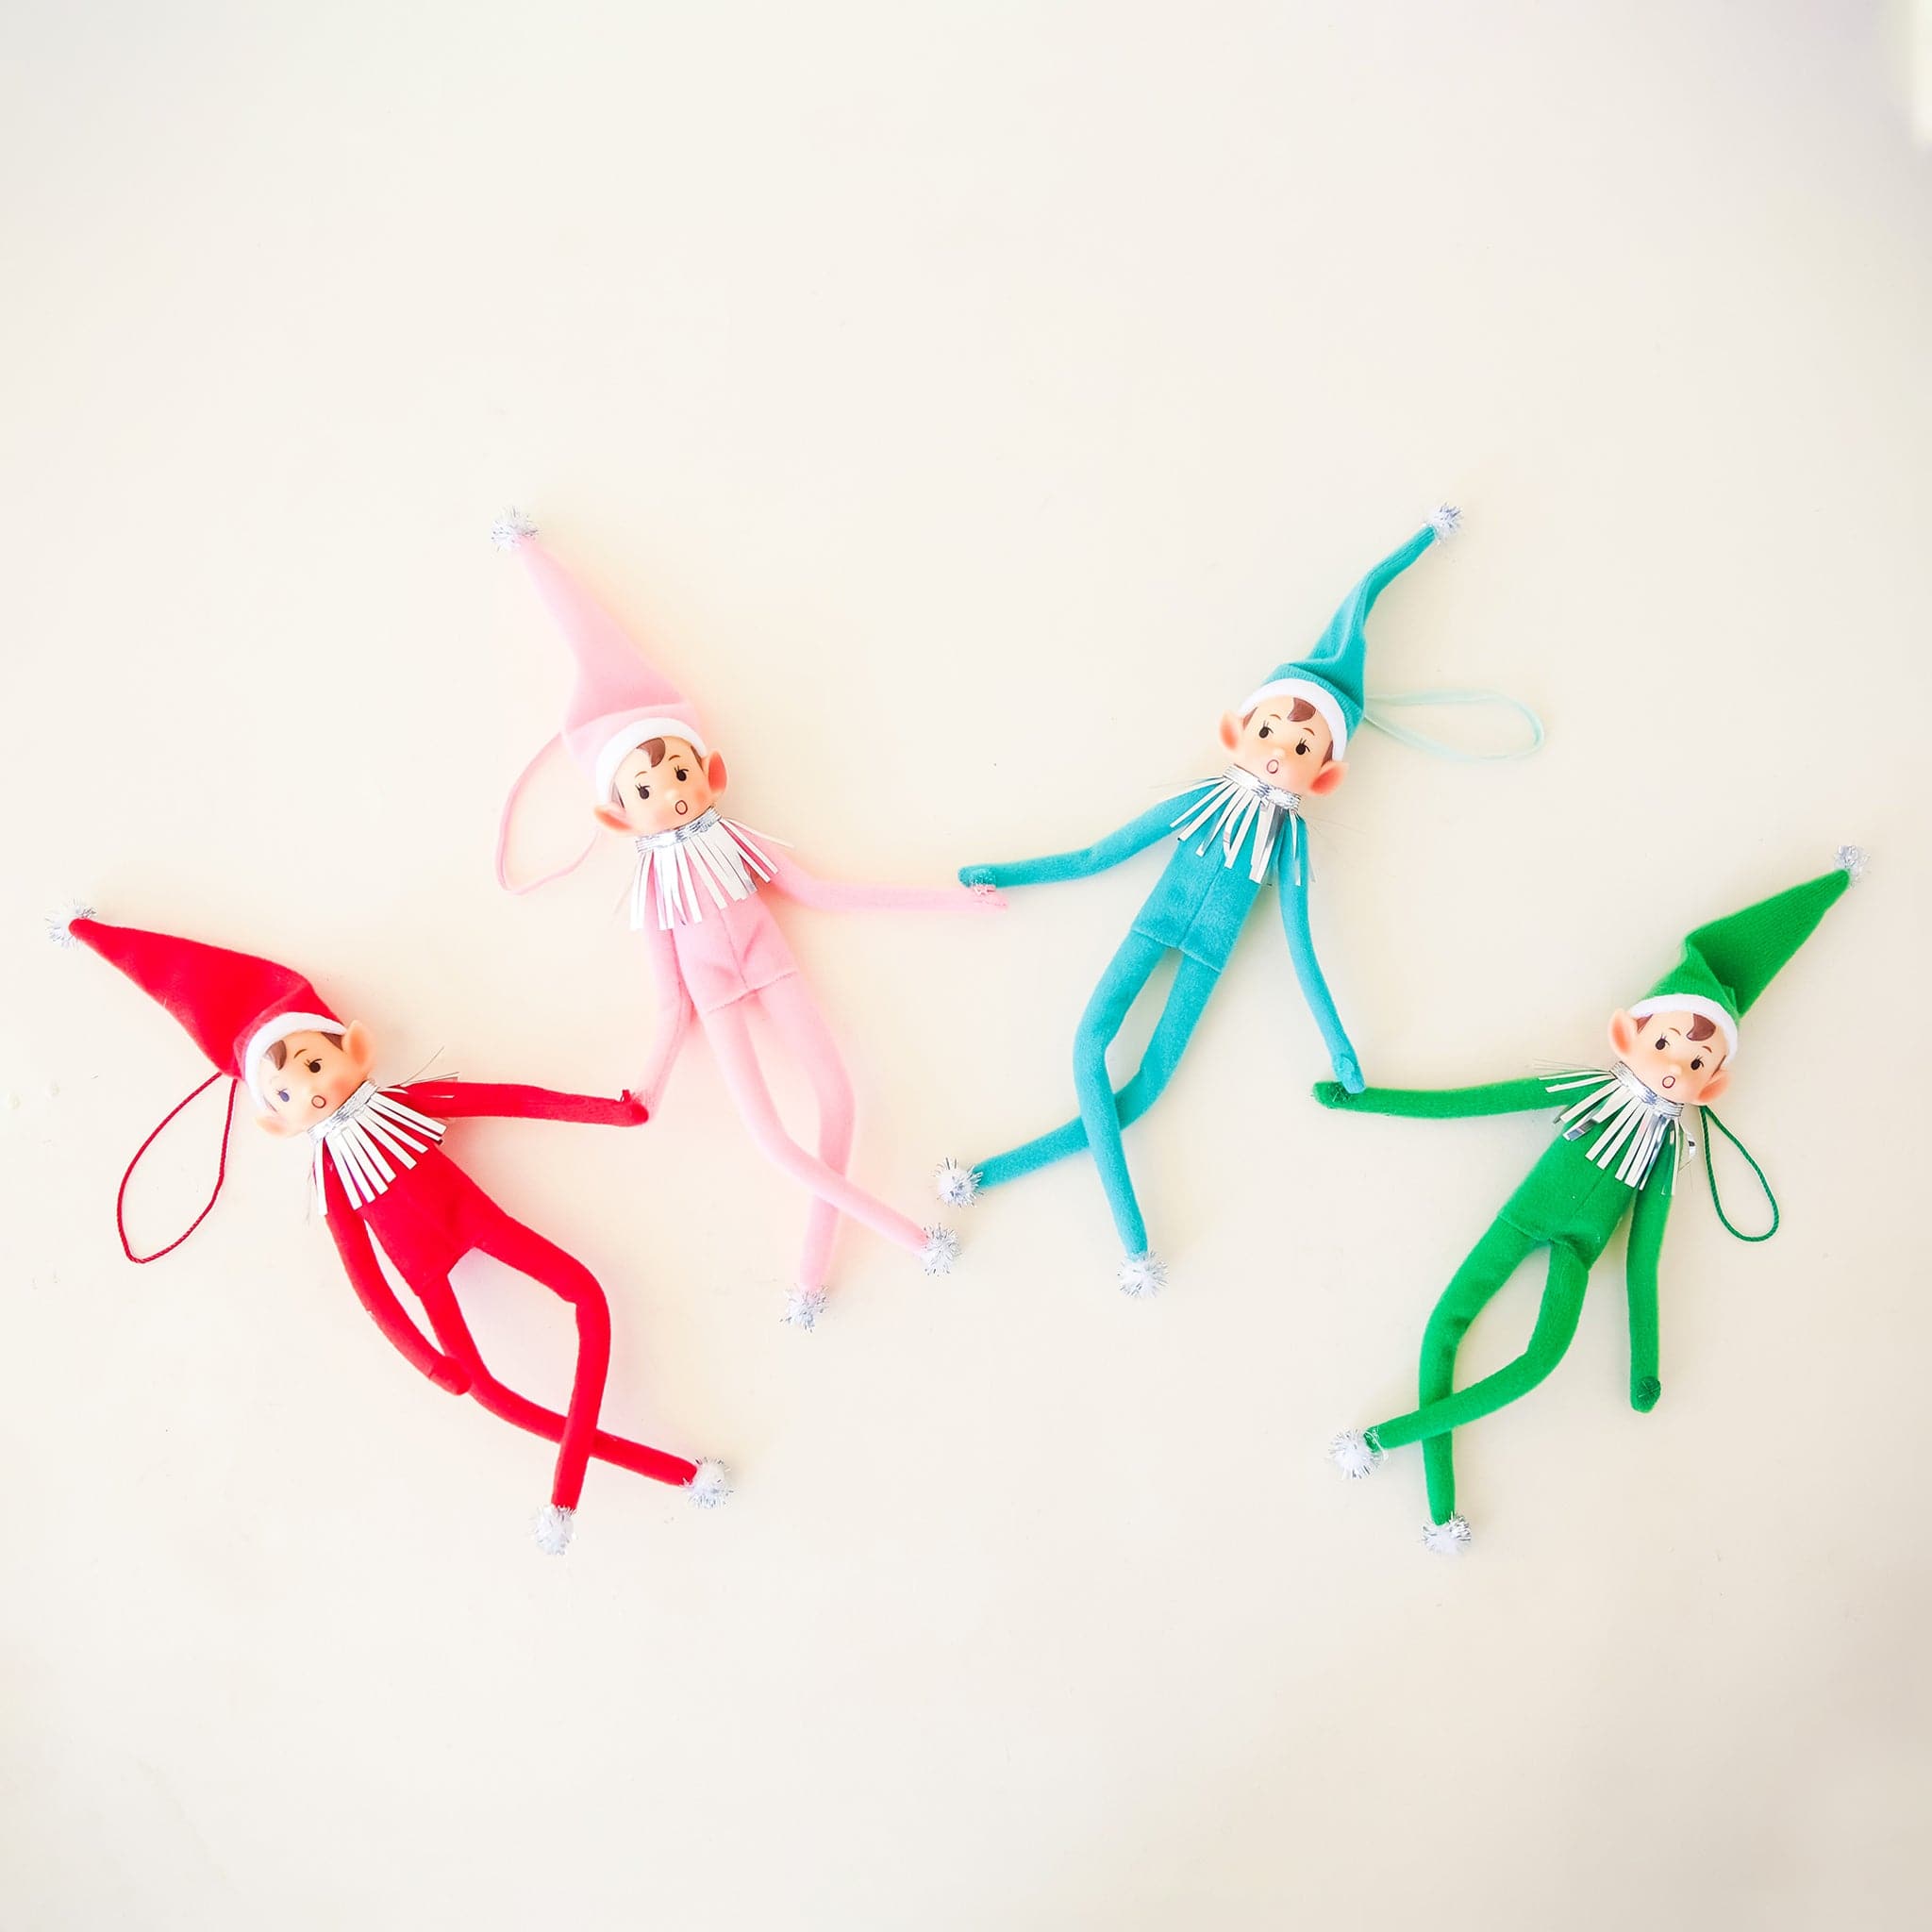 On a cream background is a green elf ornament with bendy arms and legs and a green loop for hanging and photographed next to the other three available colors, red, teal and pink.